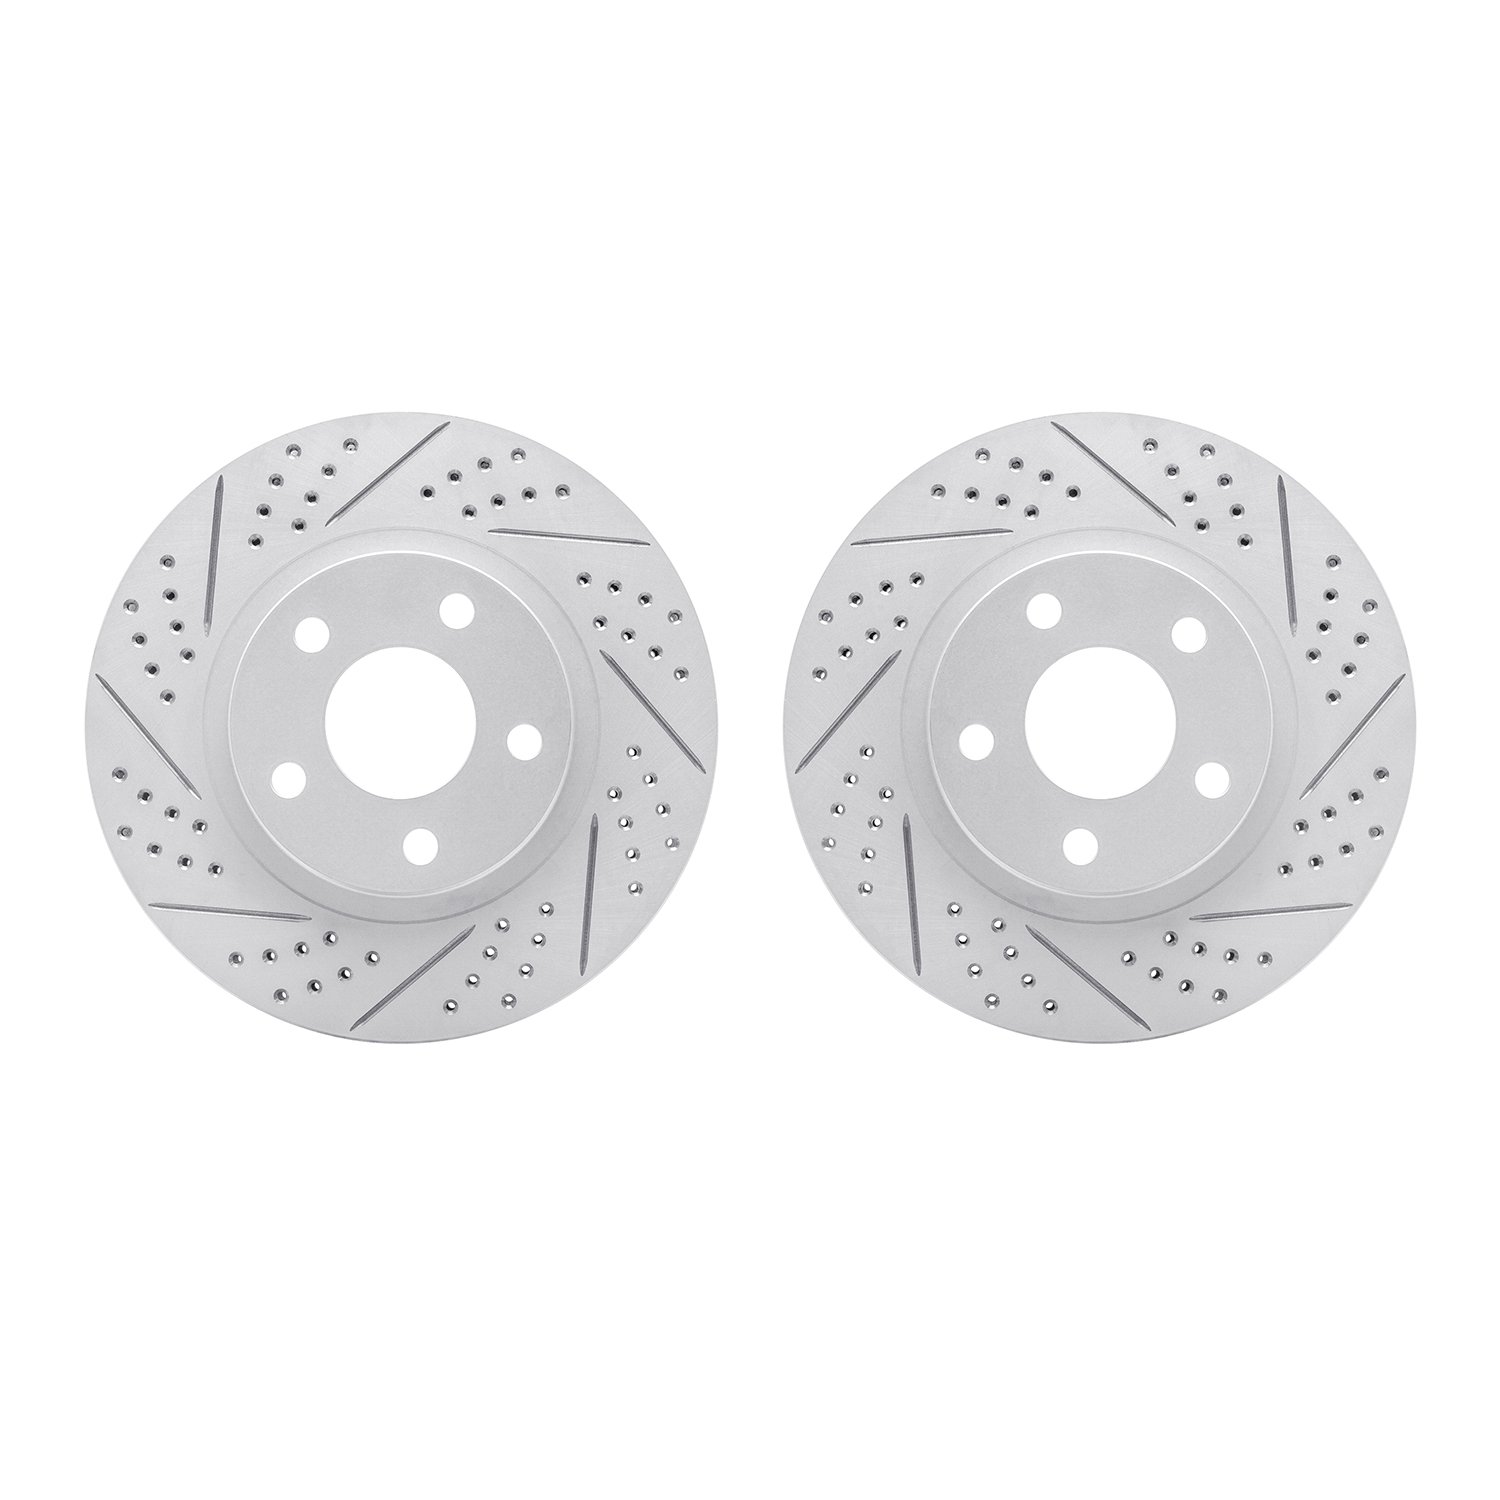 2002-45006 Geoperformance Drilled/Slotted Brake Rotors, 1997-2005 GM, Position: Front